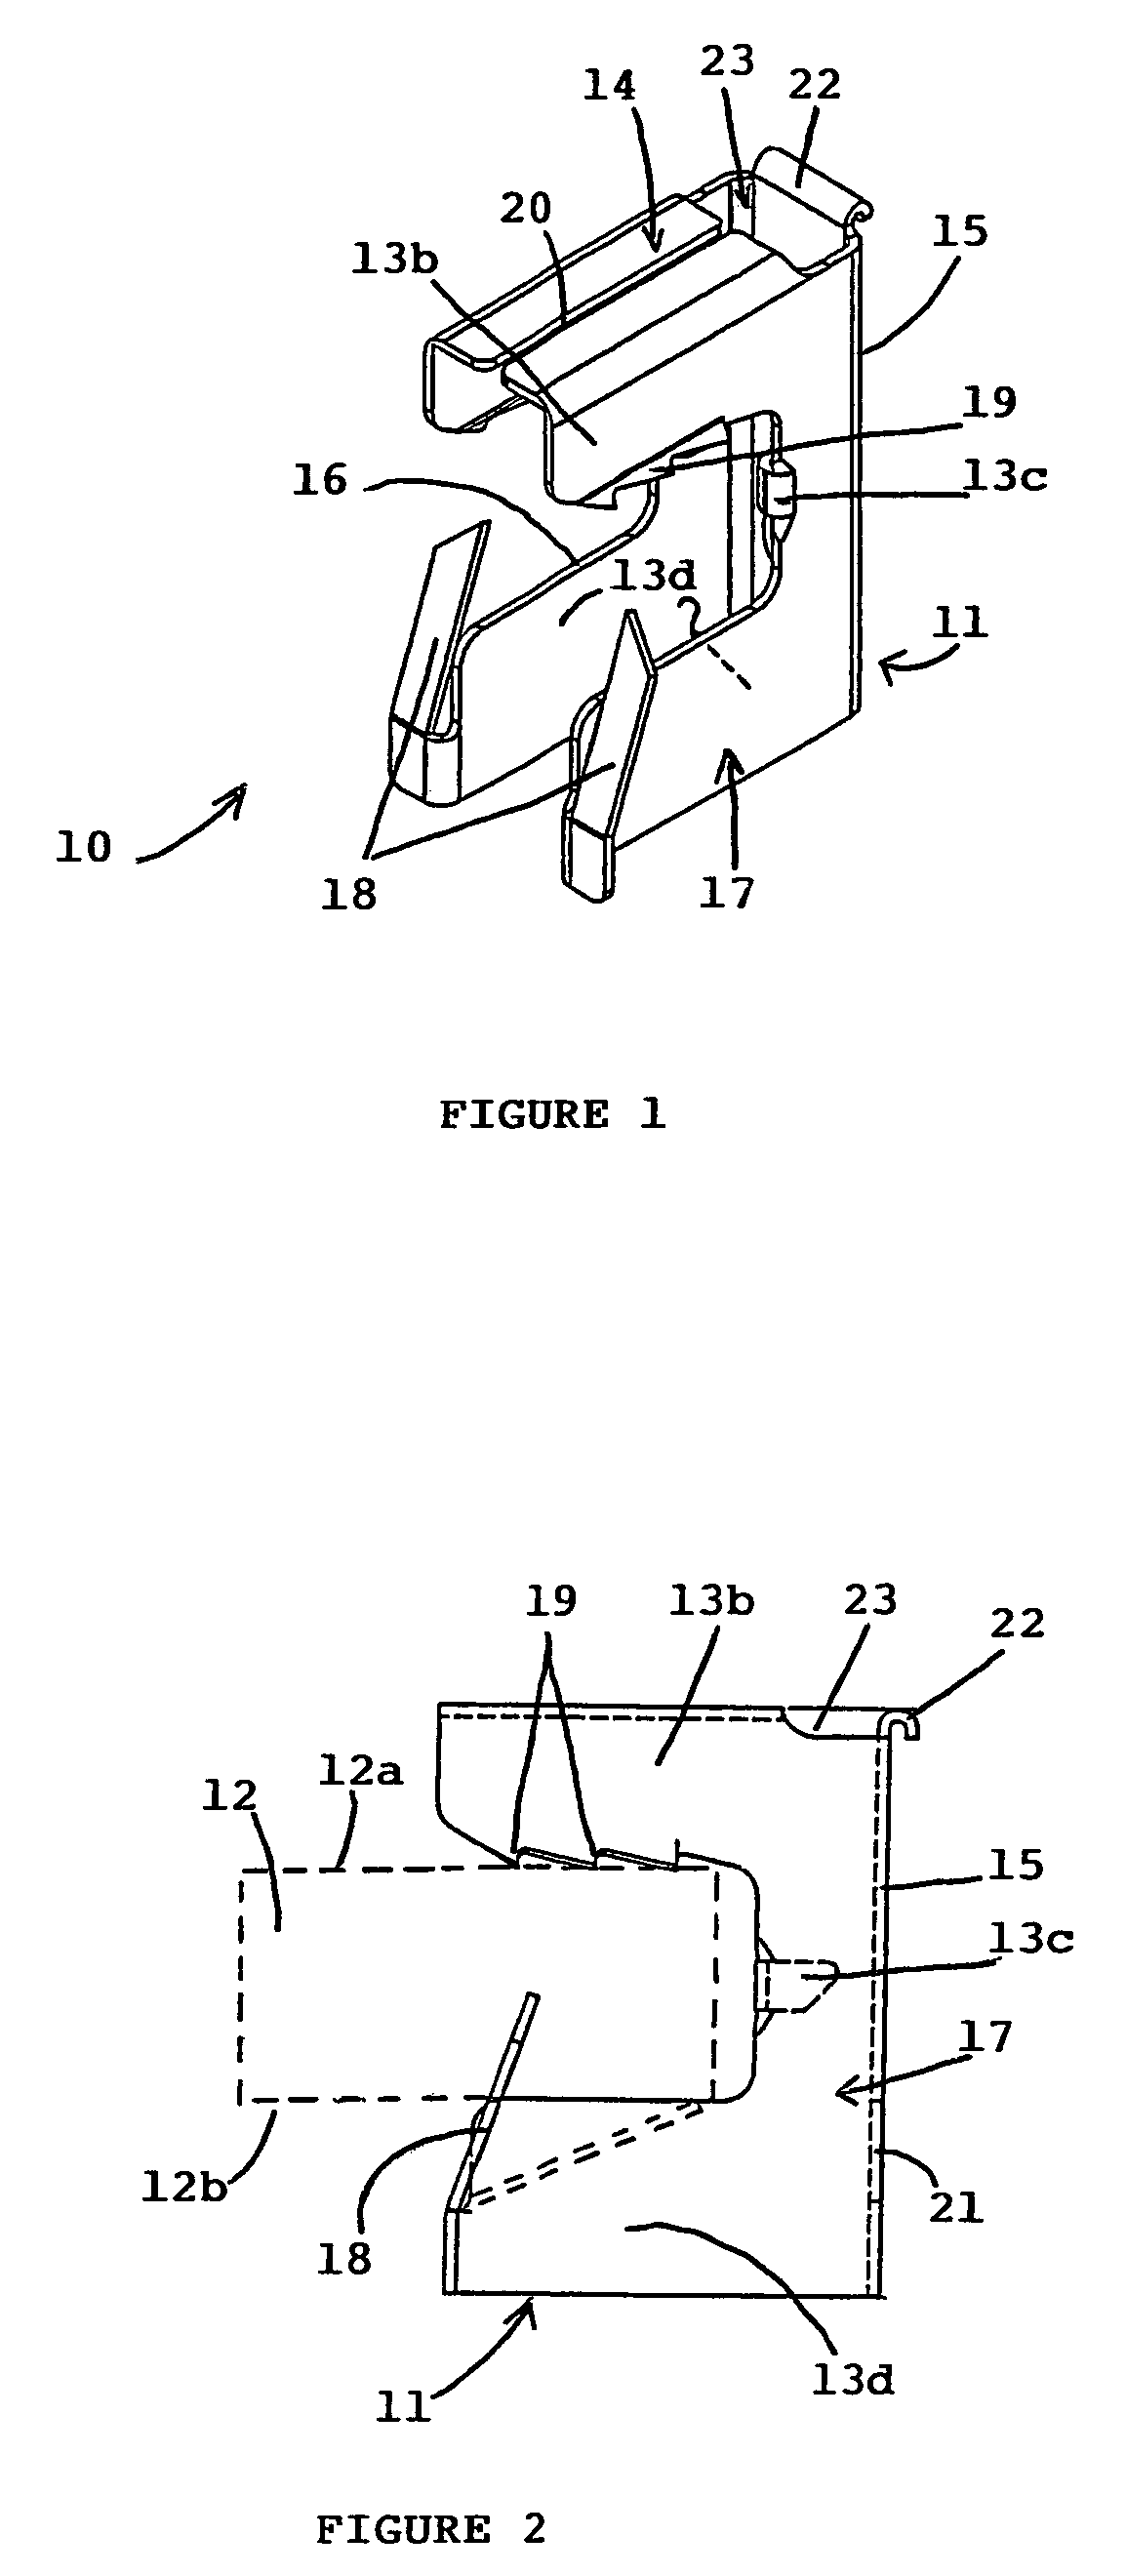 Attachment device for fixing various elements to a support